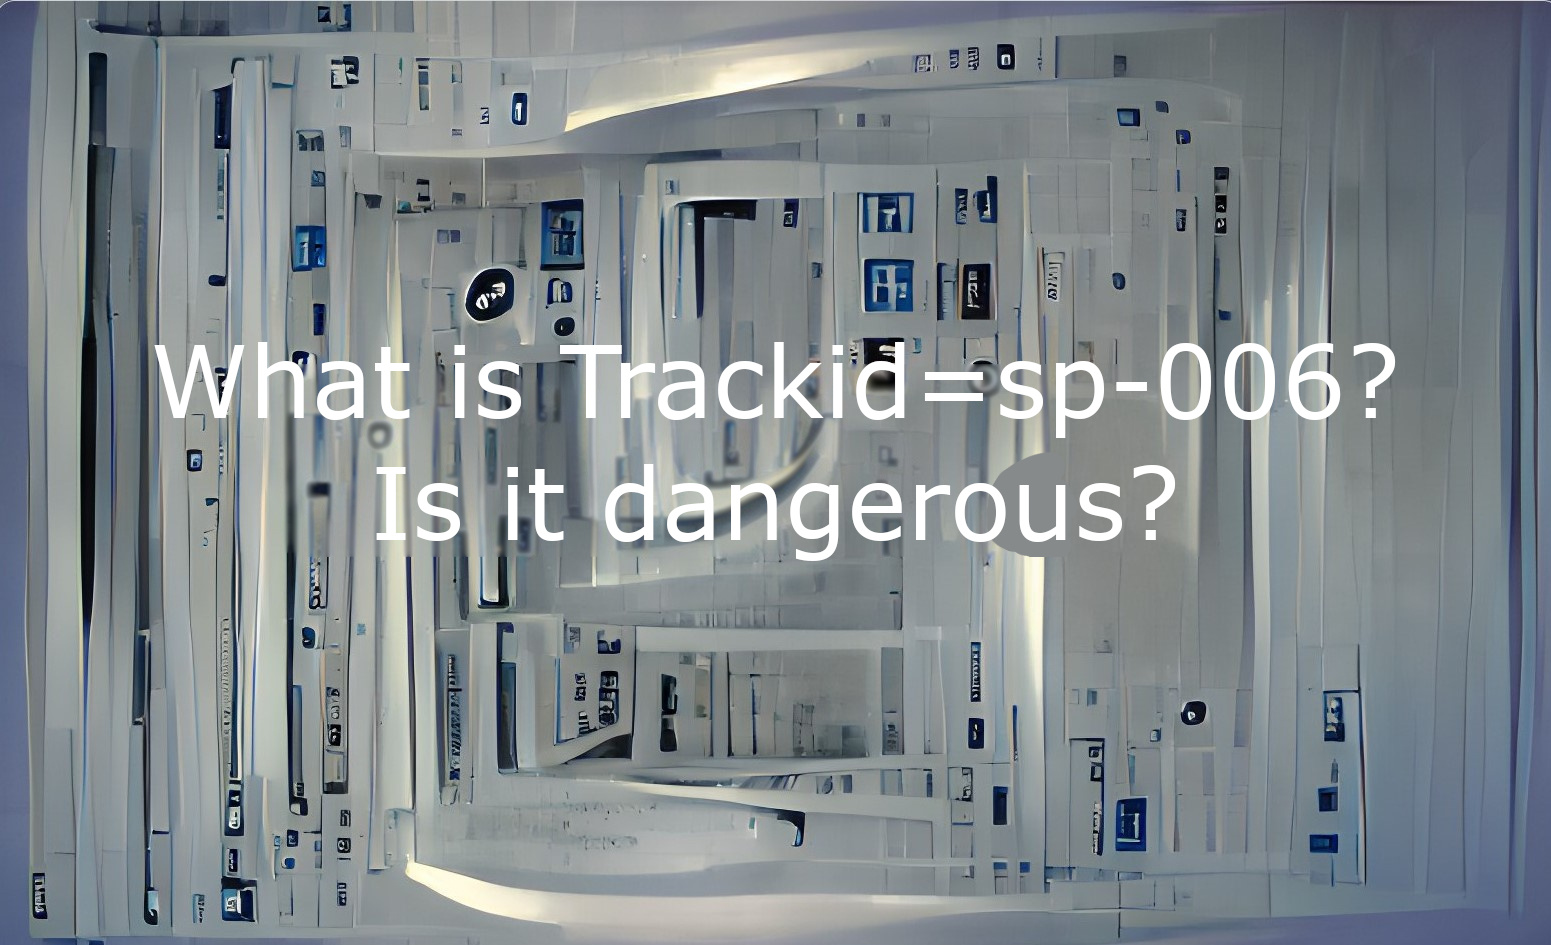 Trackid=sp-006 - what is that?